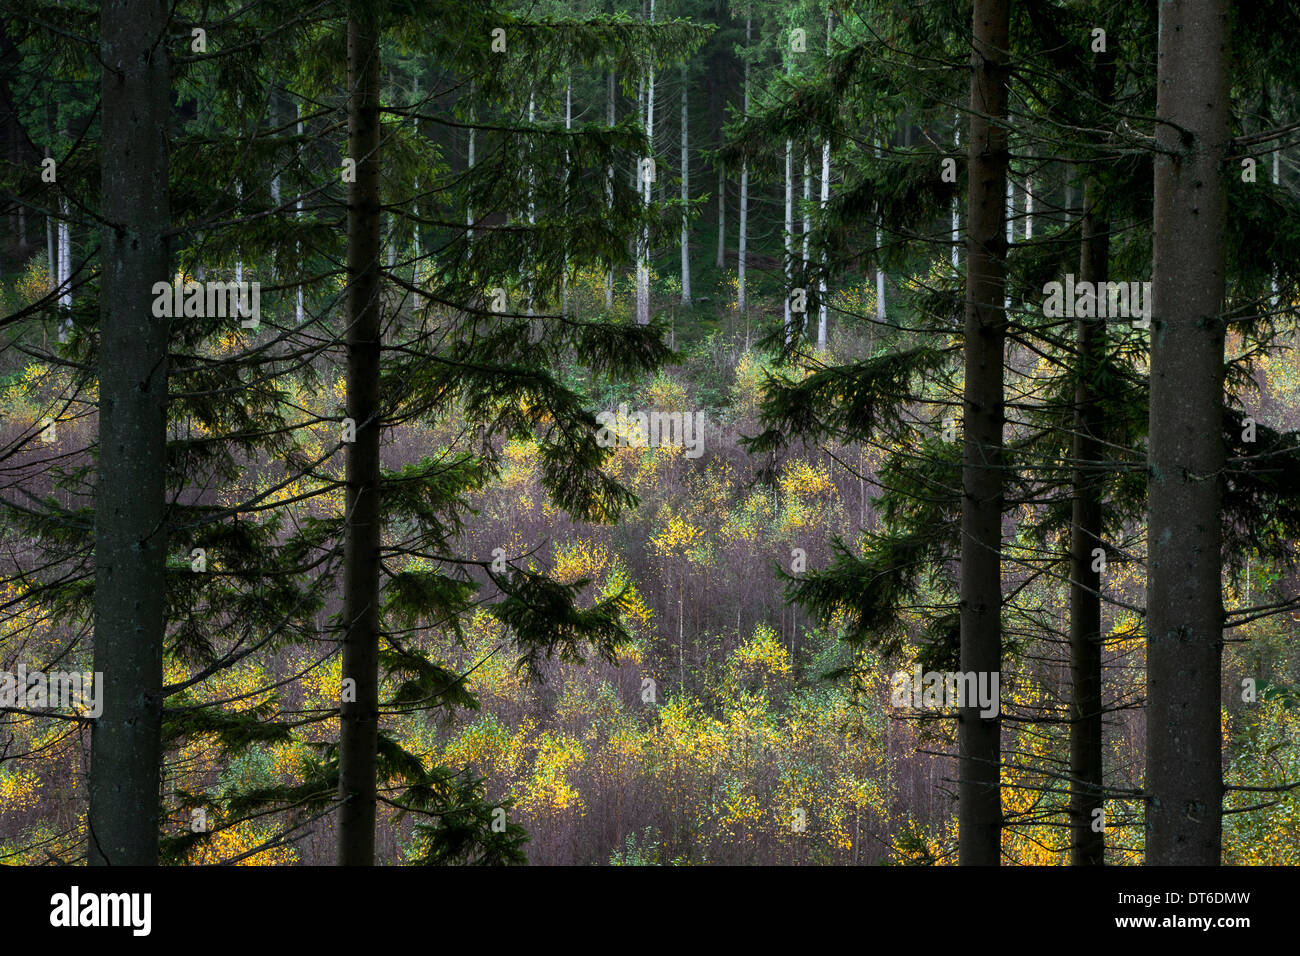 Mixed forest showing pine trees on slope and birches growing in valley Stock Photo